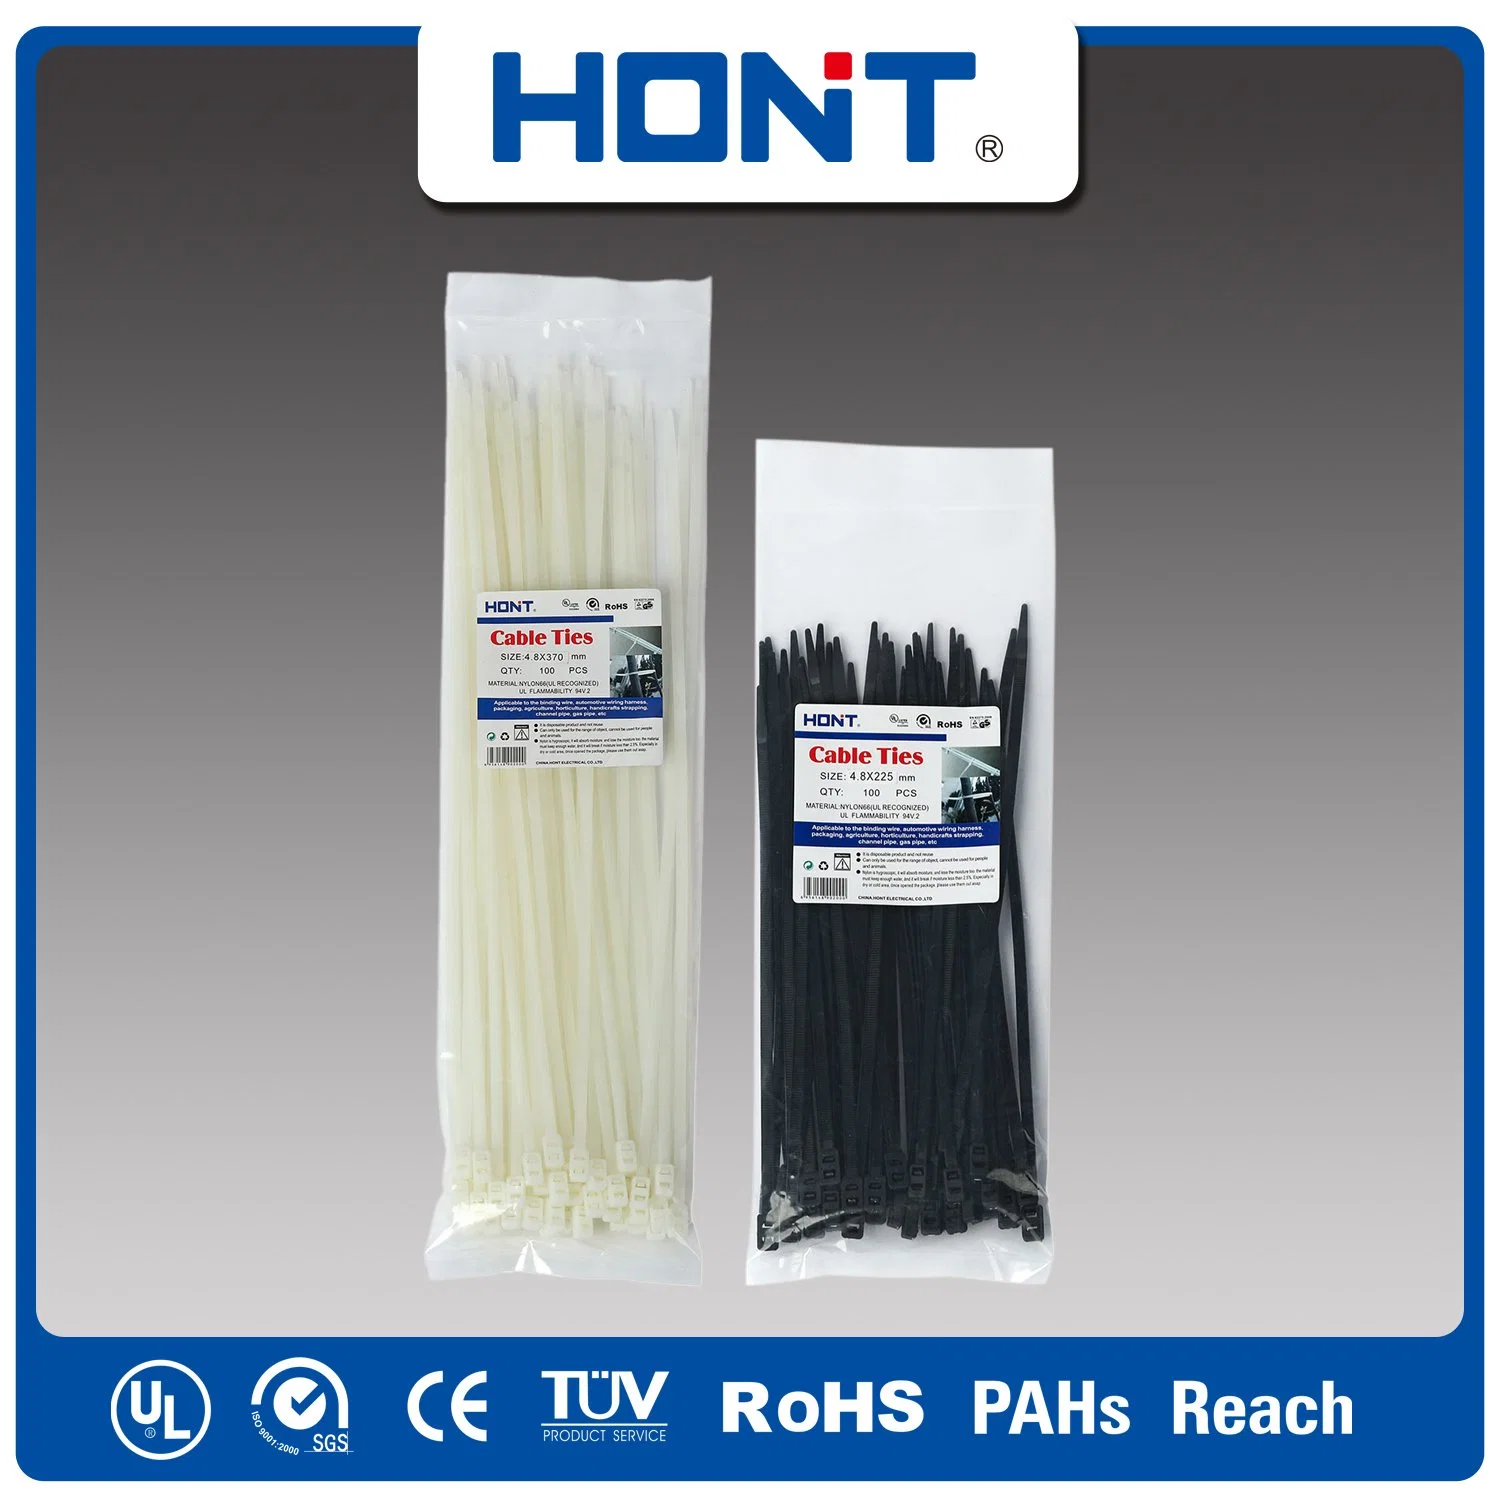 94V2 Releasable Tie Hont Bag + Sticker Exporting Carton/Tray Plastic Impeller Blade Cable Accessories